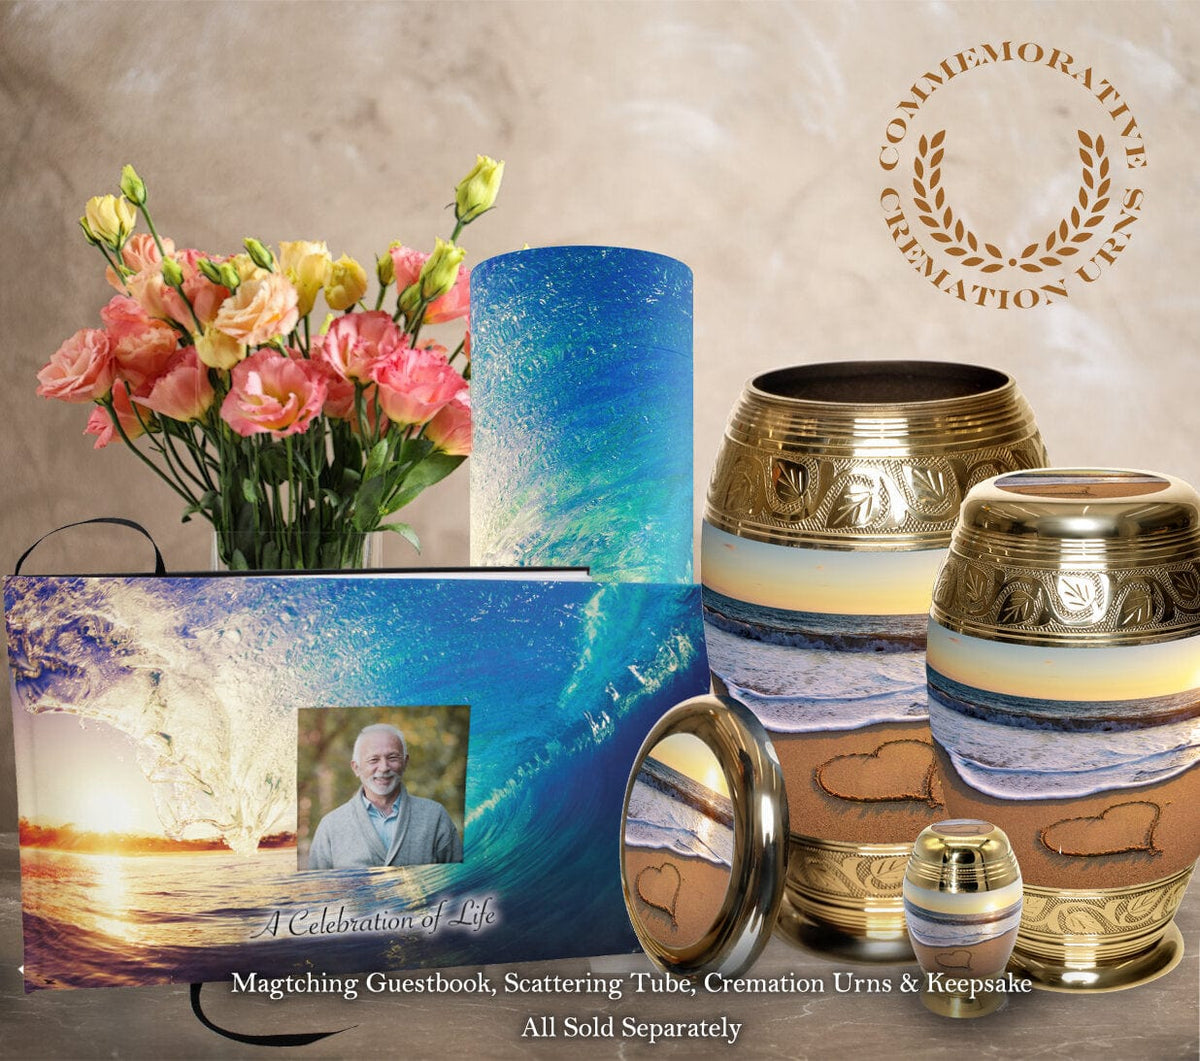 Commemorative Cremation Urns Soul Surfing Matching Themed &#39;Celebration of Life&#39; Guest Book for Funeral or Memorial Service